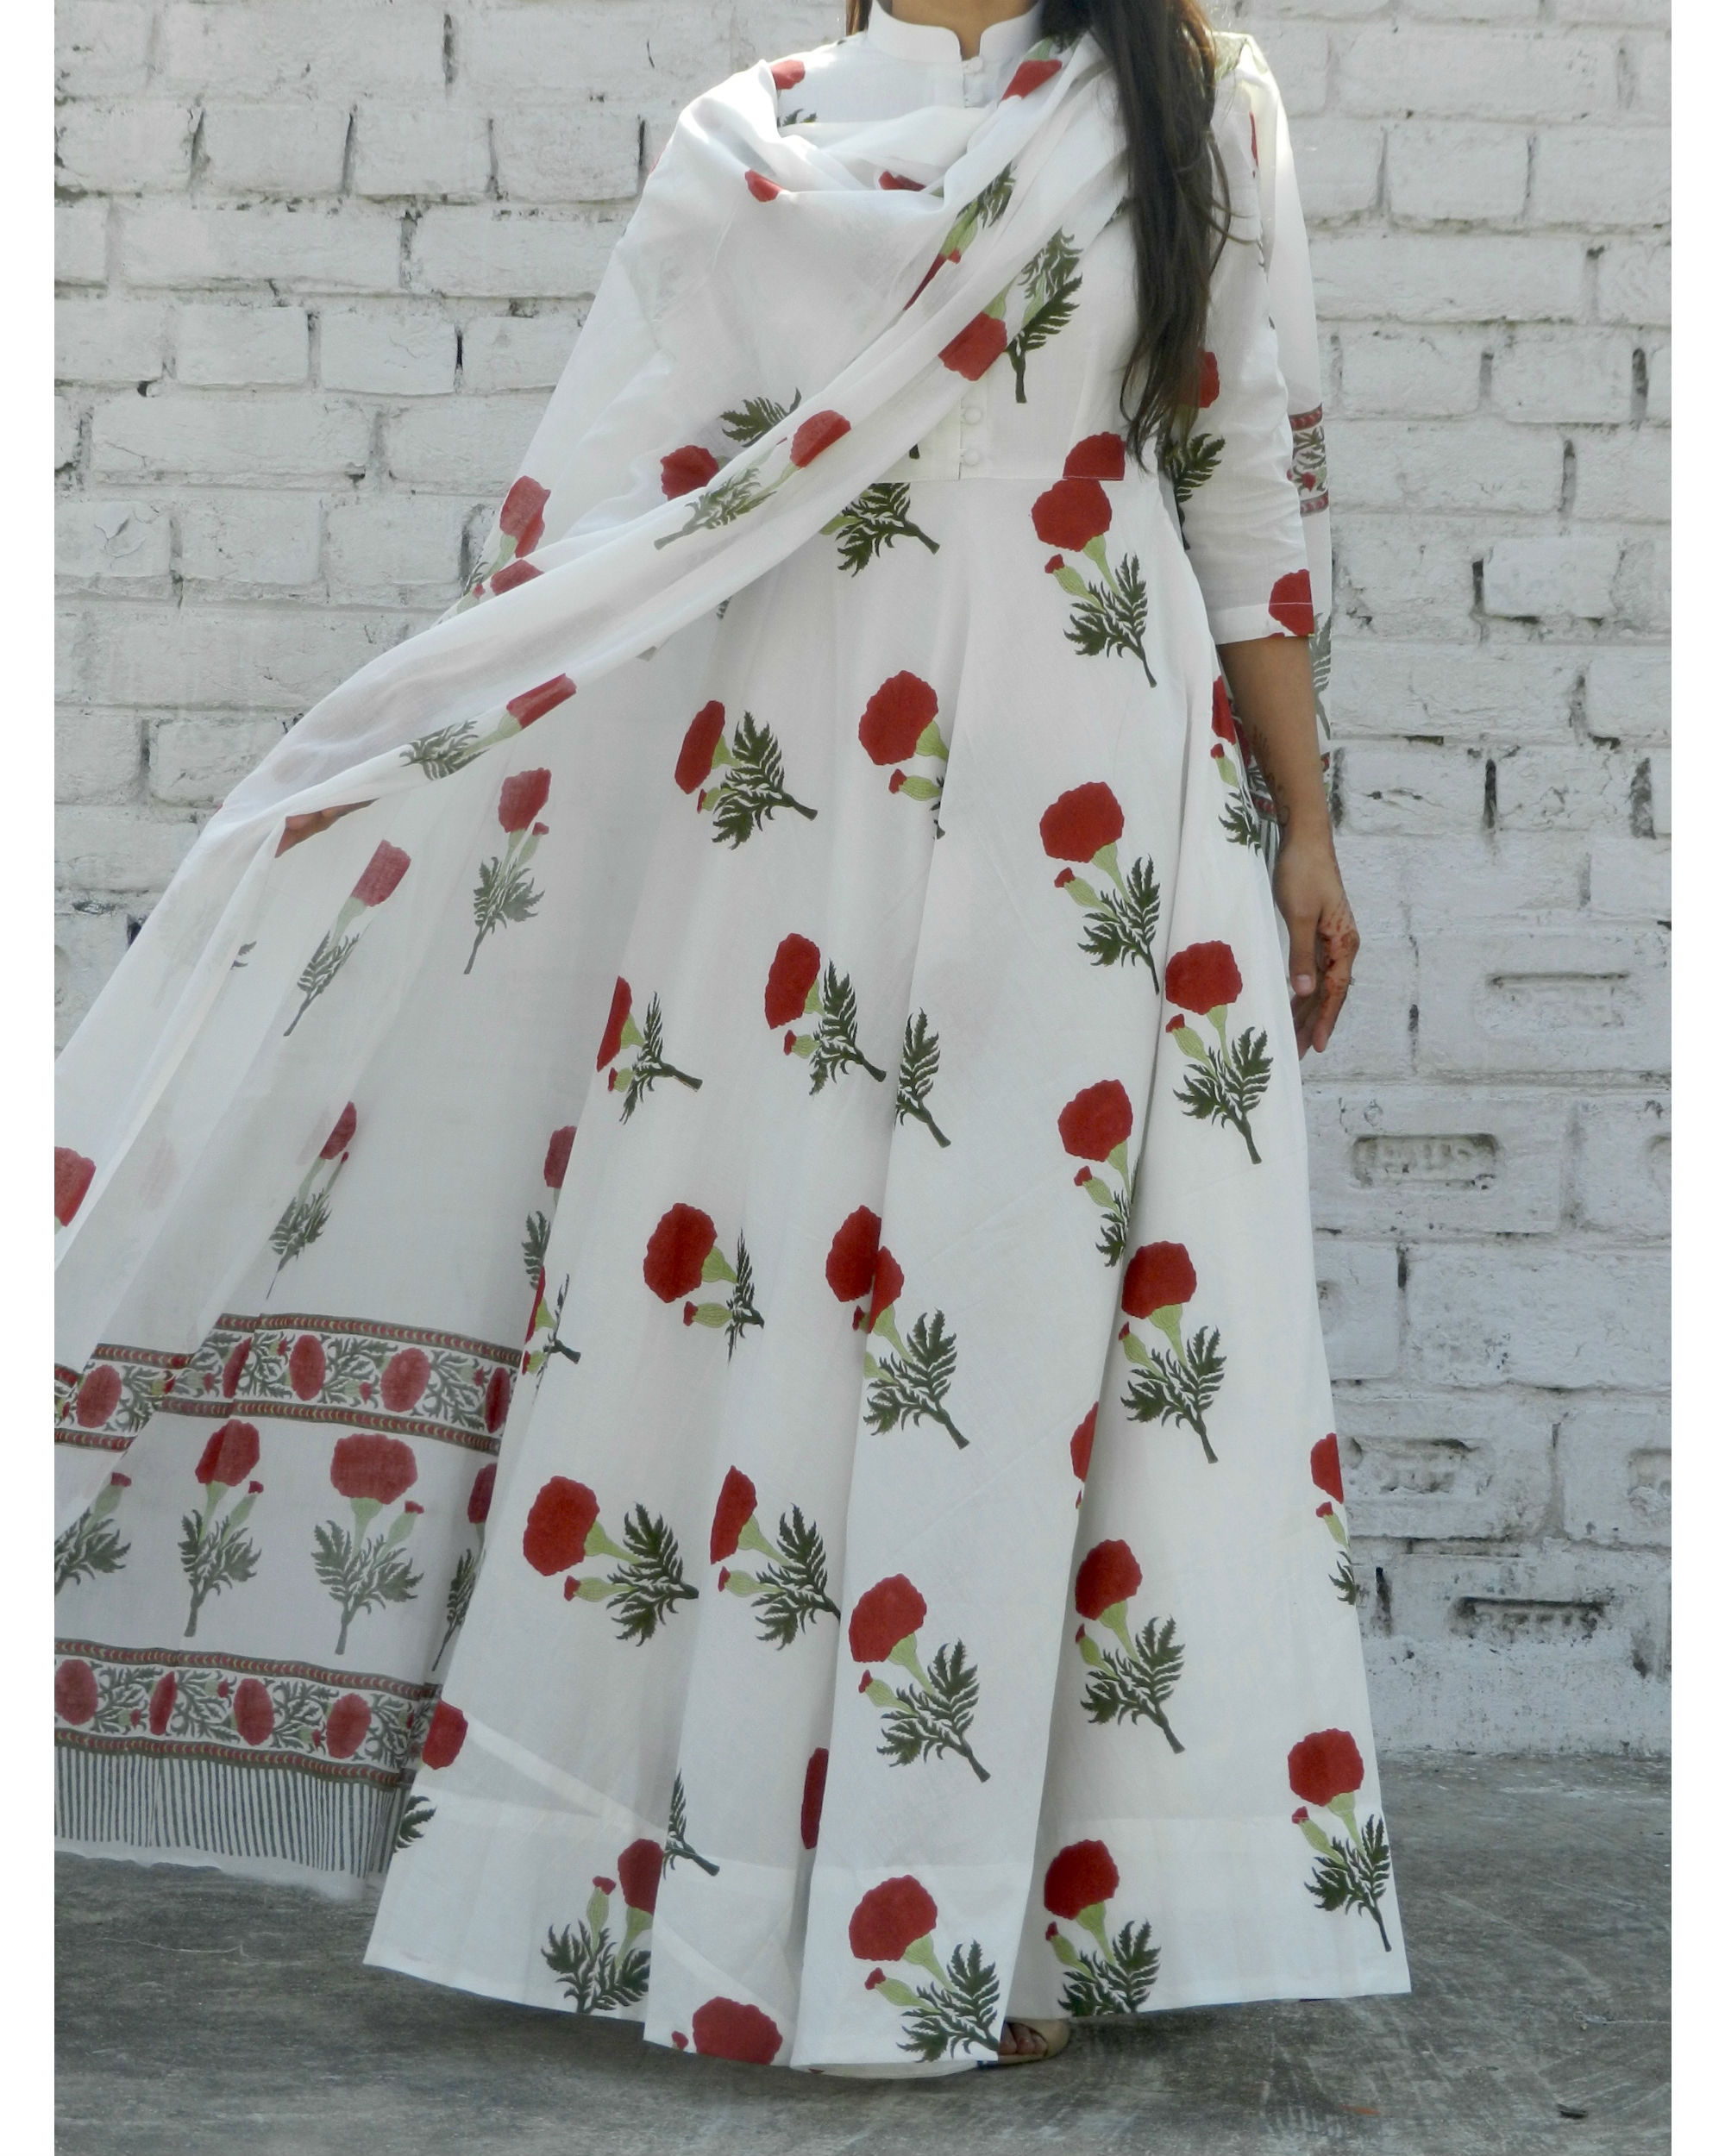 white anarkali suit with red dupatta